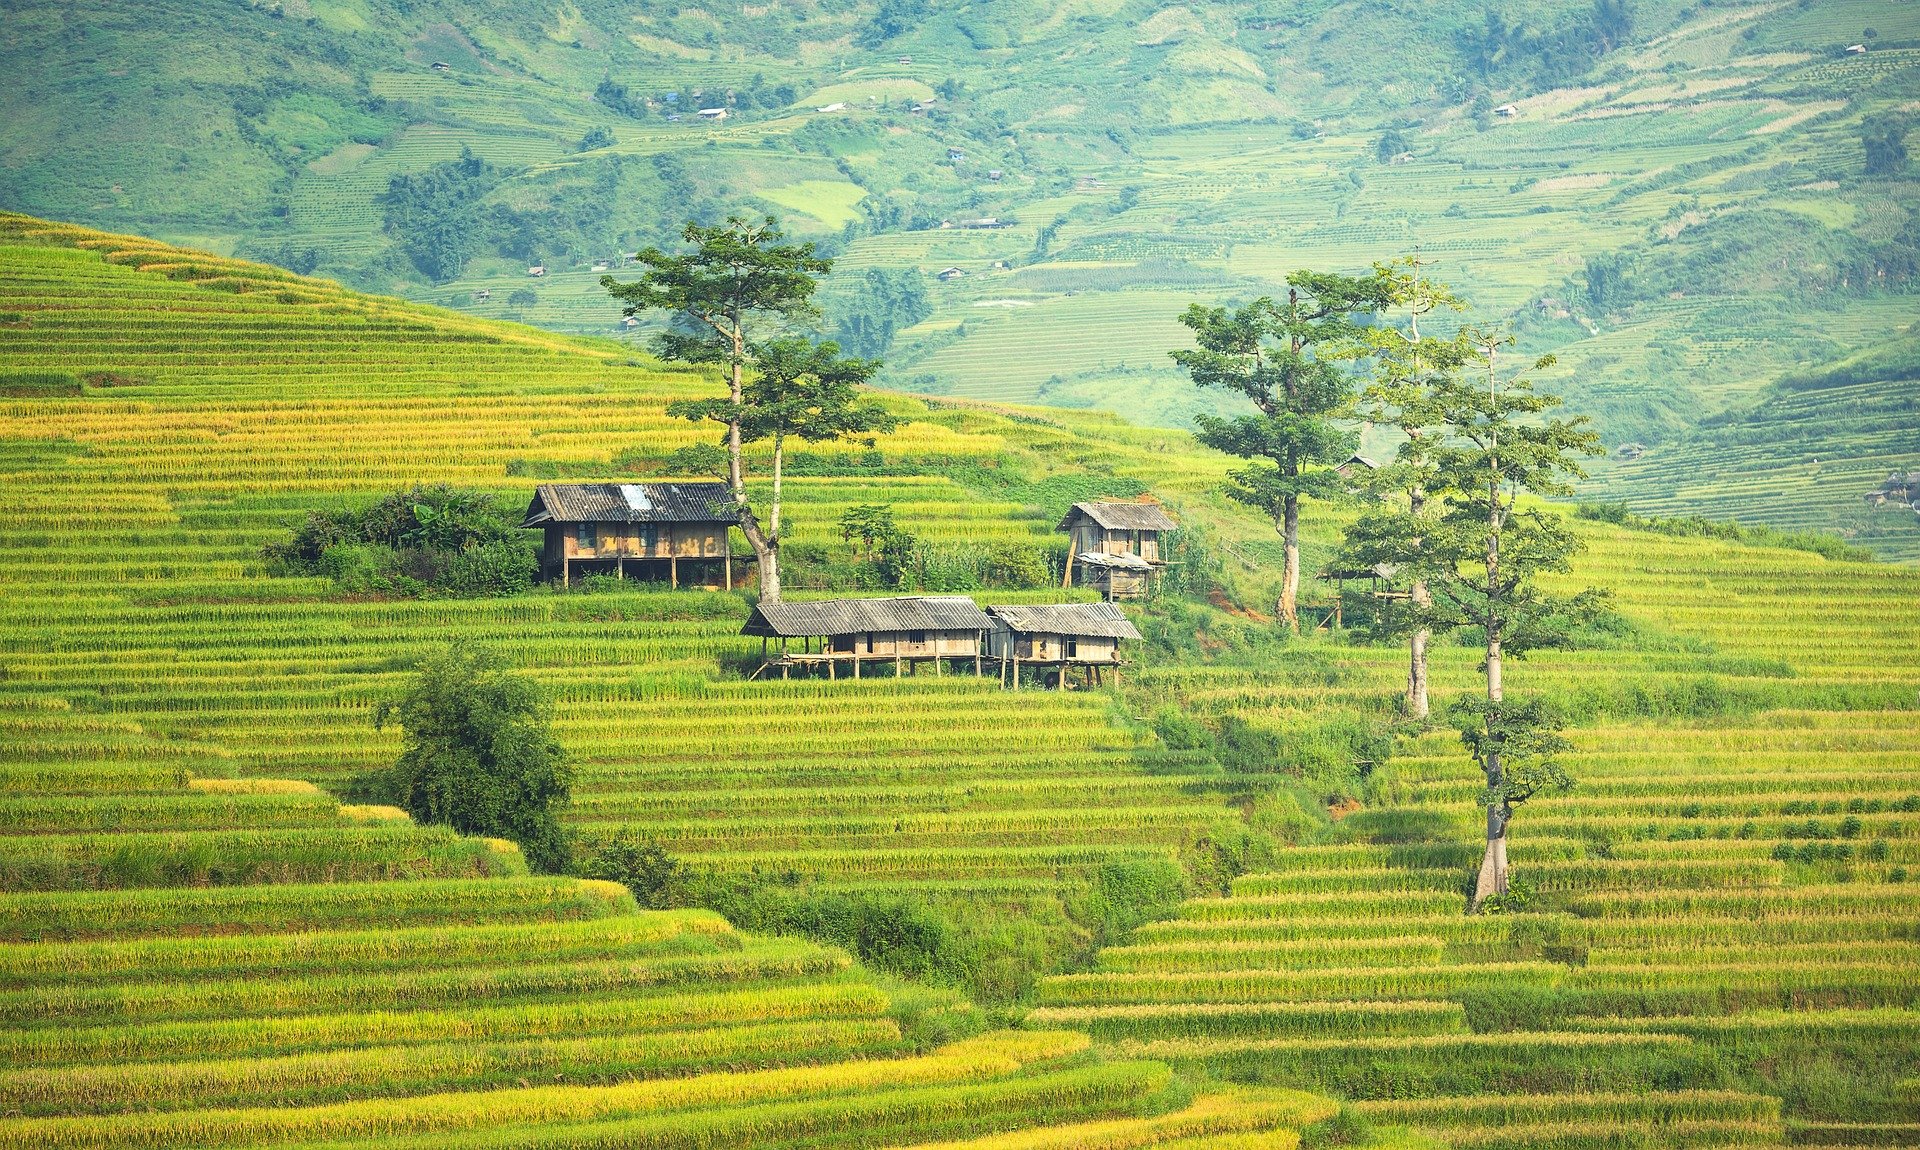 Pictured - A village in Thailand situated in the agricultural area | Source: Pixabay 